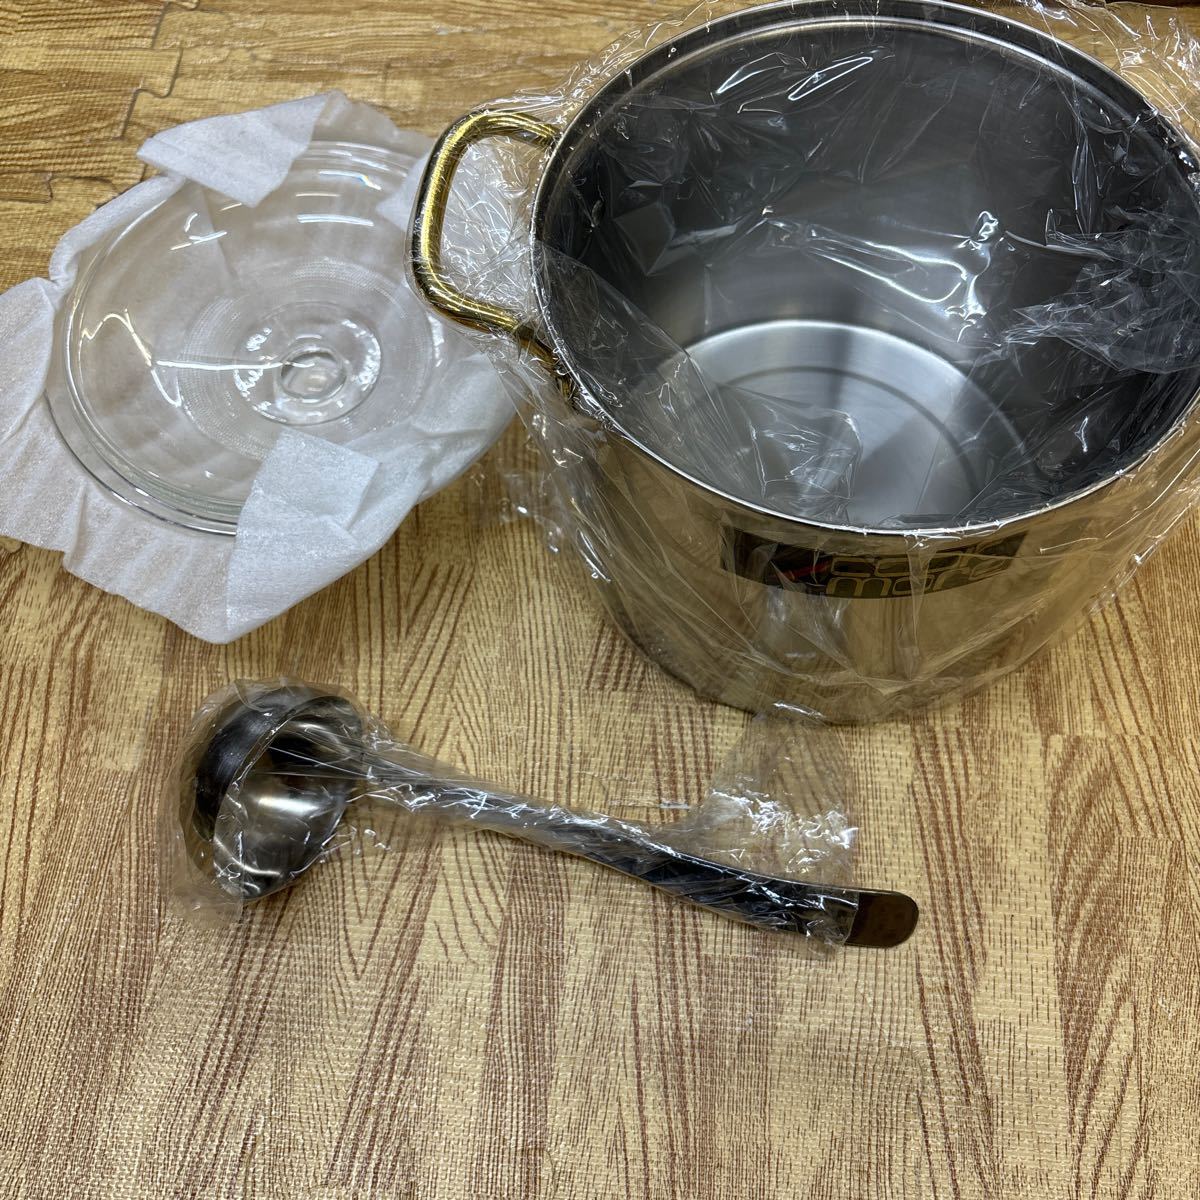 A1-150 クックモア　cook more 両手鍋 鍋　調理器具 おたま付き_画像1